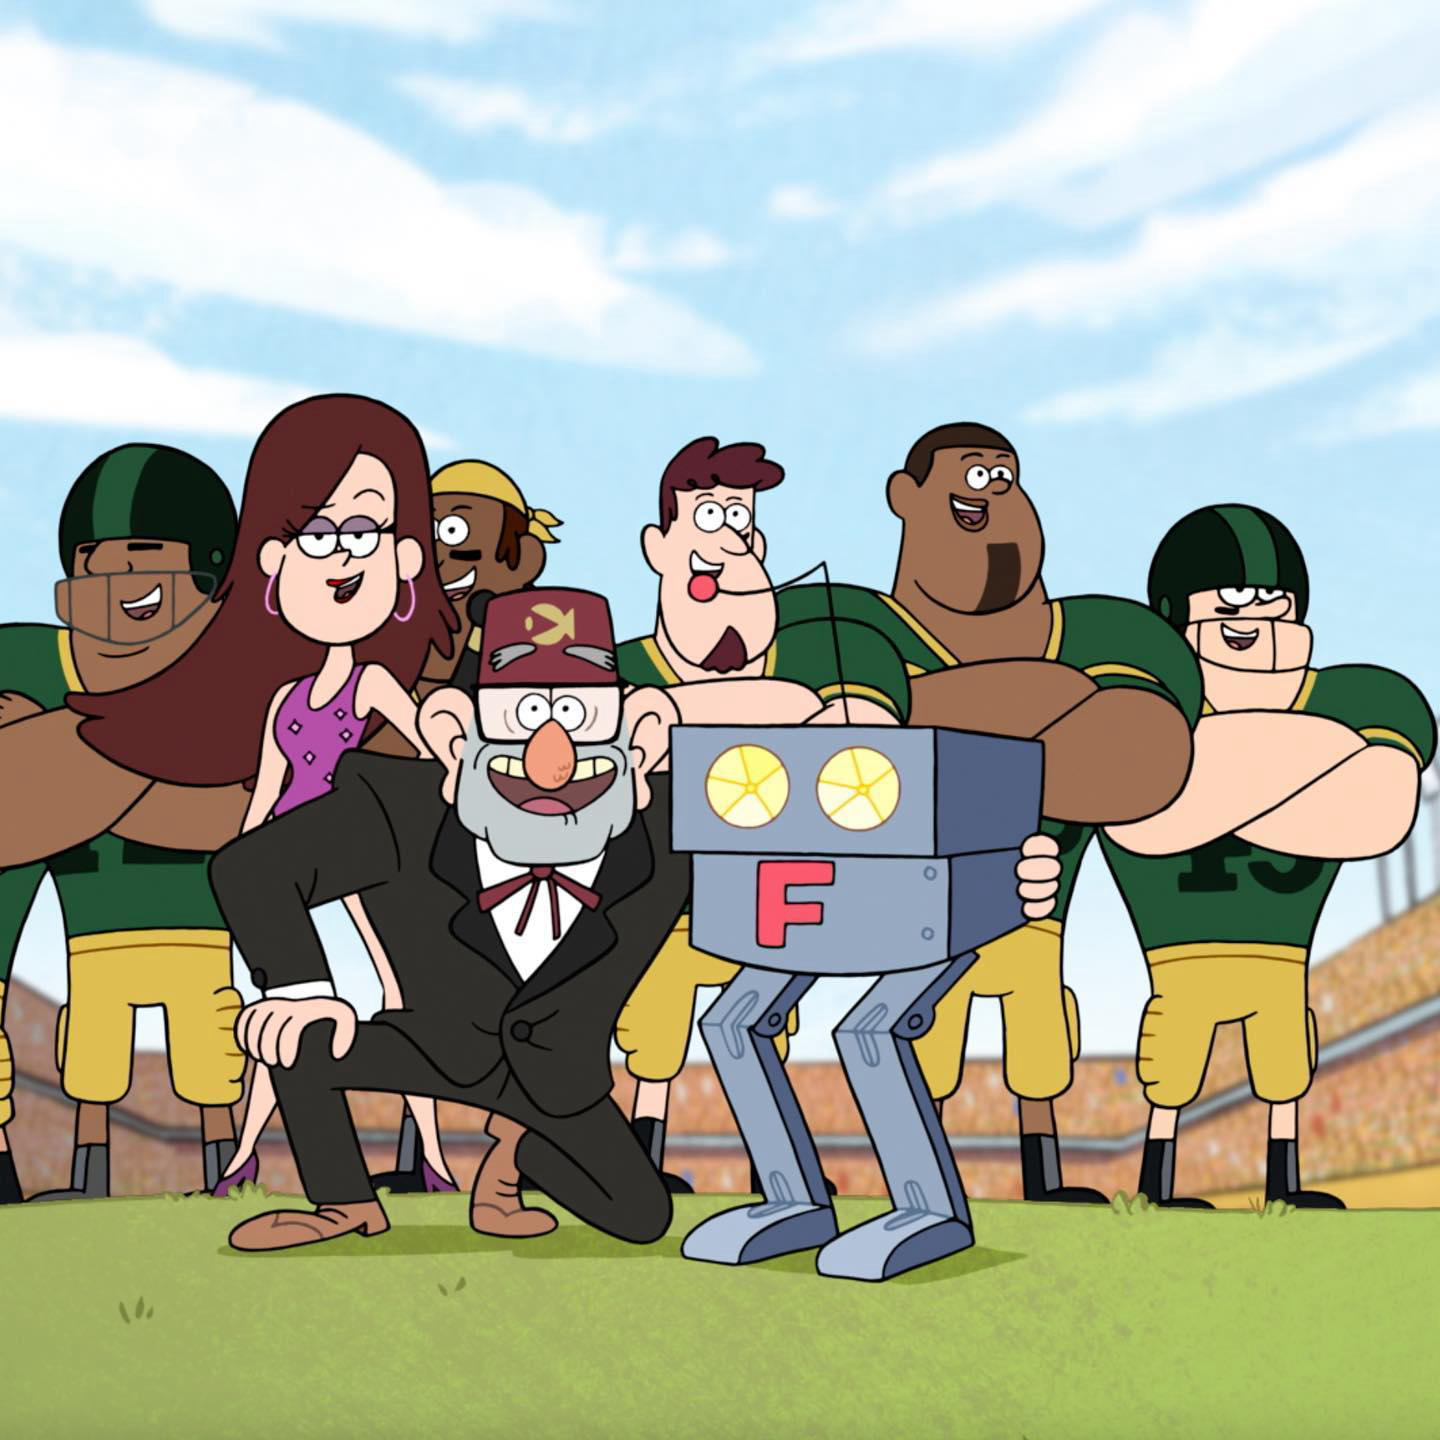 image  1 Disney XD - Just some iconic throwback football moments to help us get excited for the Pro Bowl this